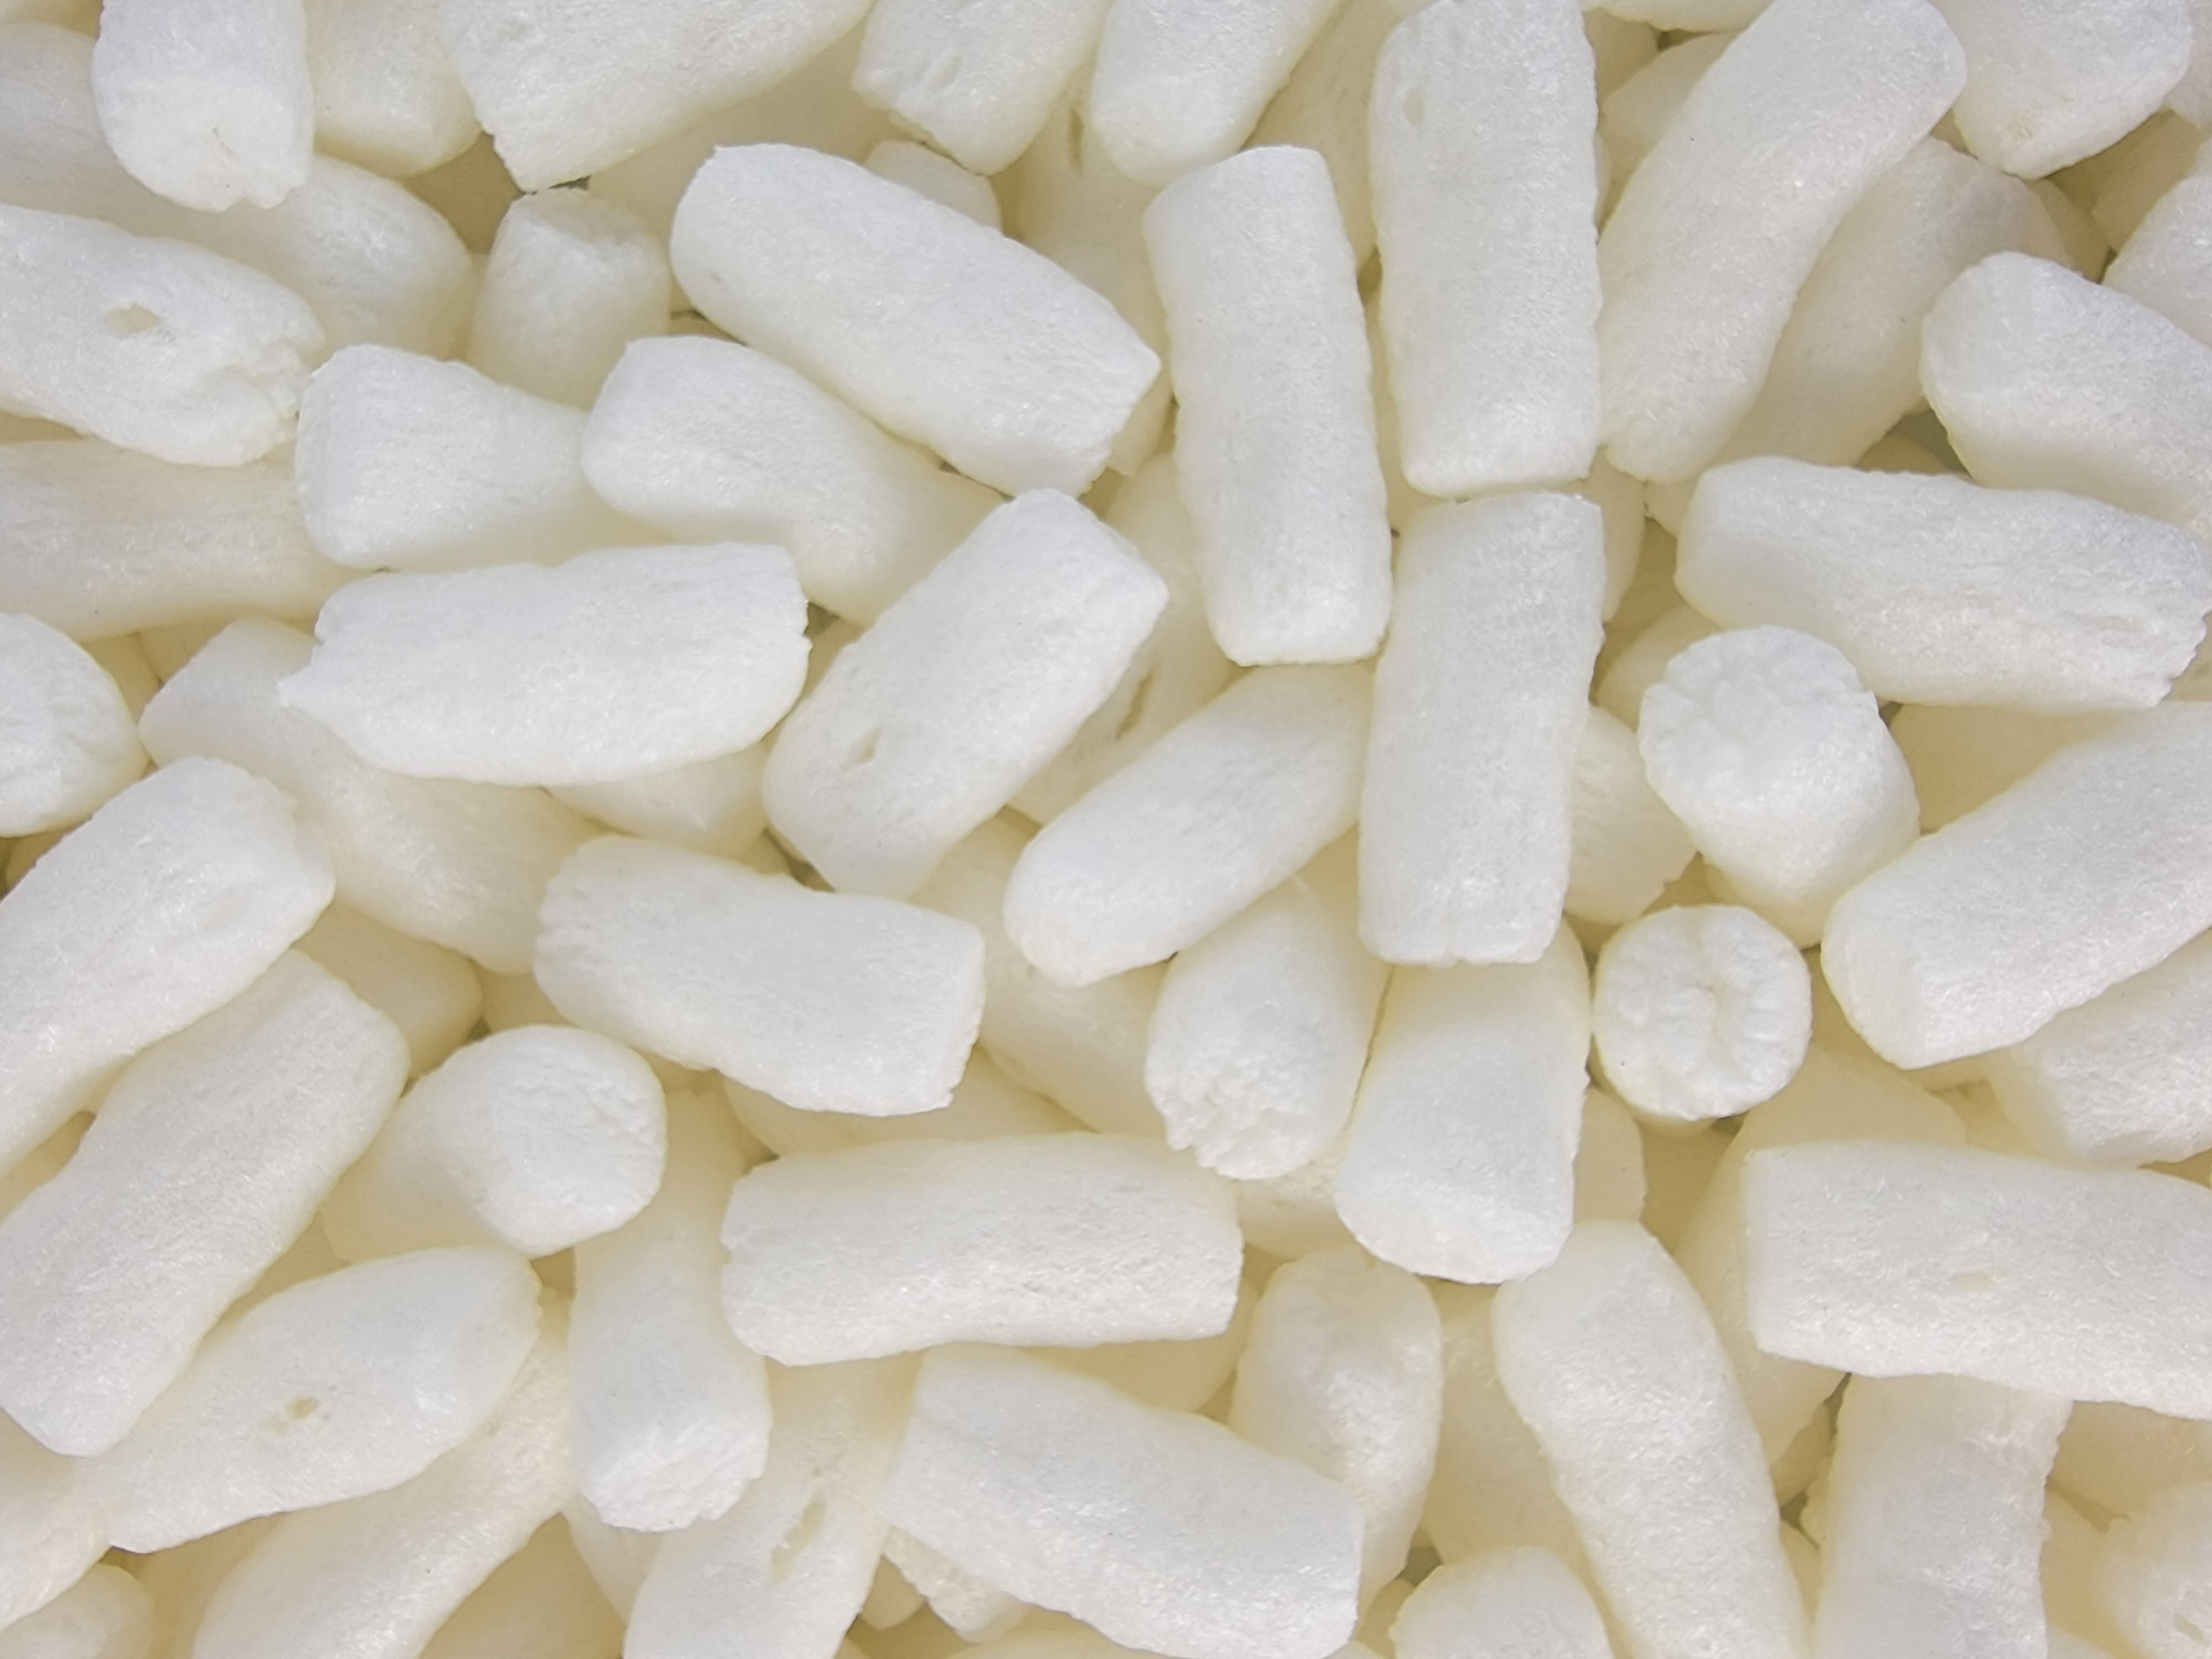 BOXED 3 CUBIC FEET "BIODEGRADABLE" LOOSE FILL PACKING PEANUTS HIGHEST QUALITY 